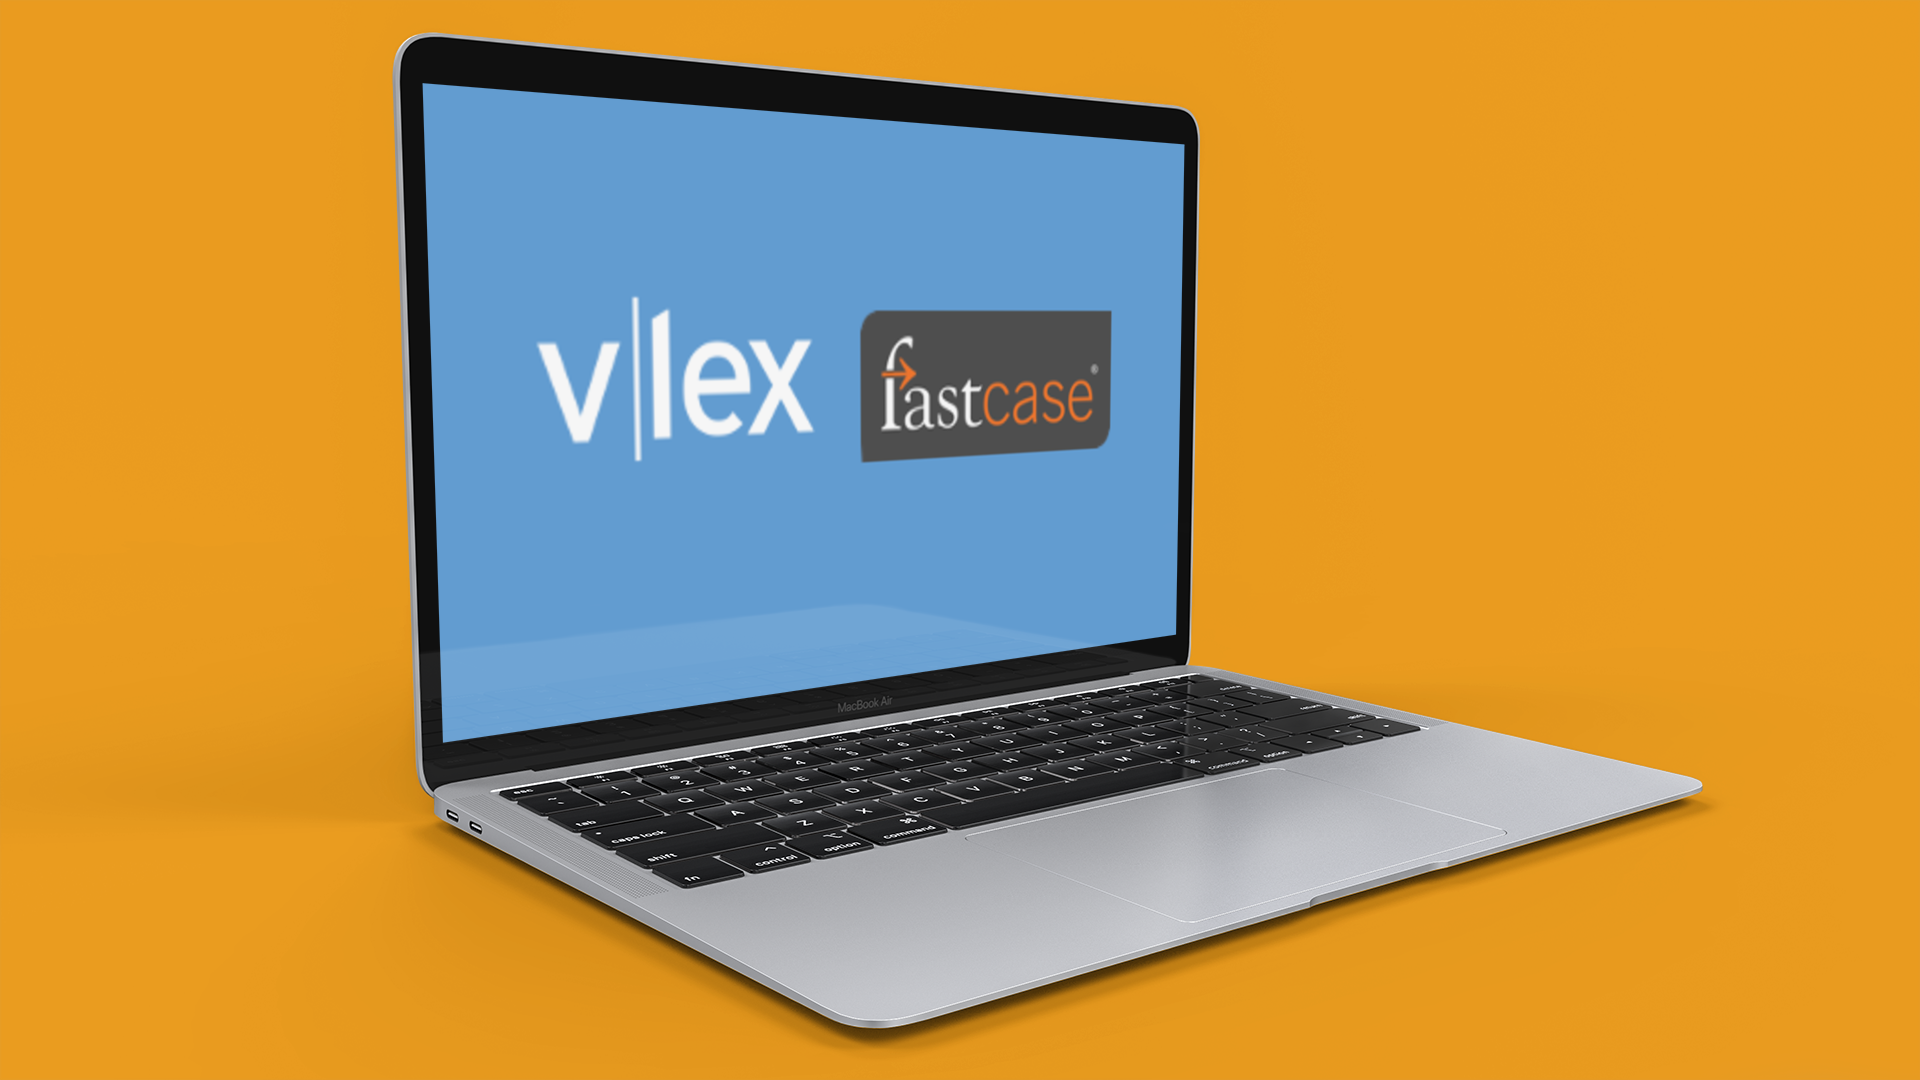 In Major Legal Tech Deal, vLex and Fastcase Merge, Creating A Global Legal Research Company, Backed By Oakley Capital and Bain Capital